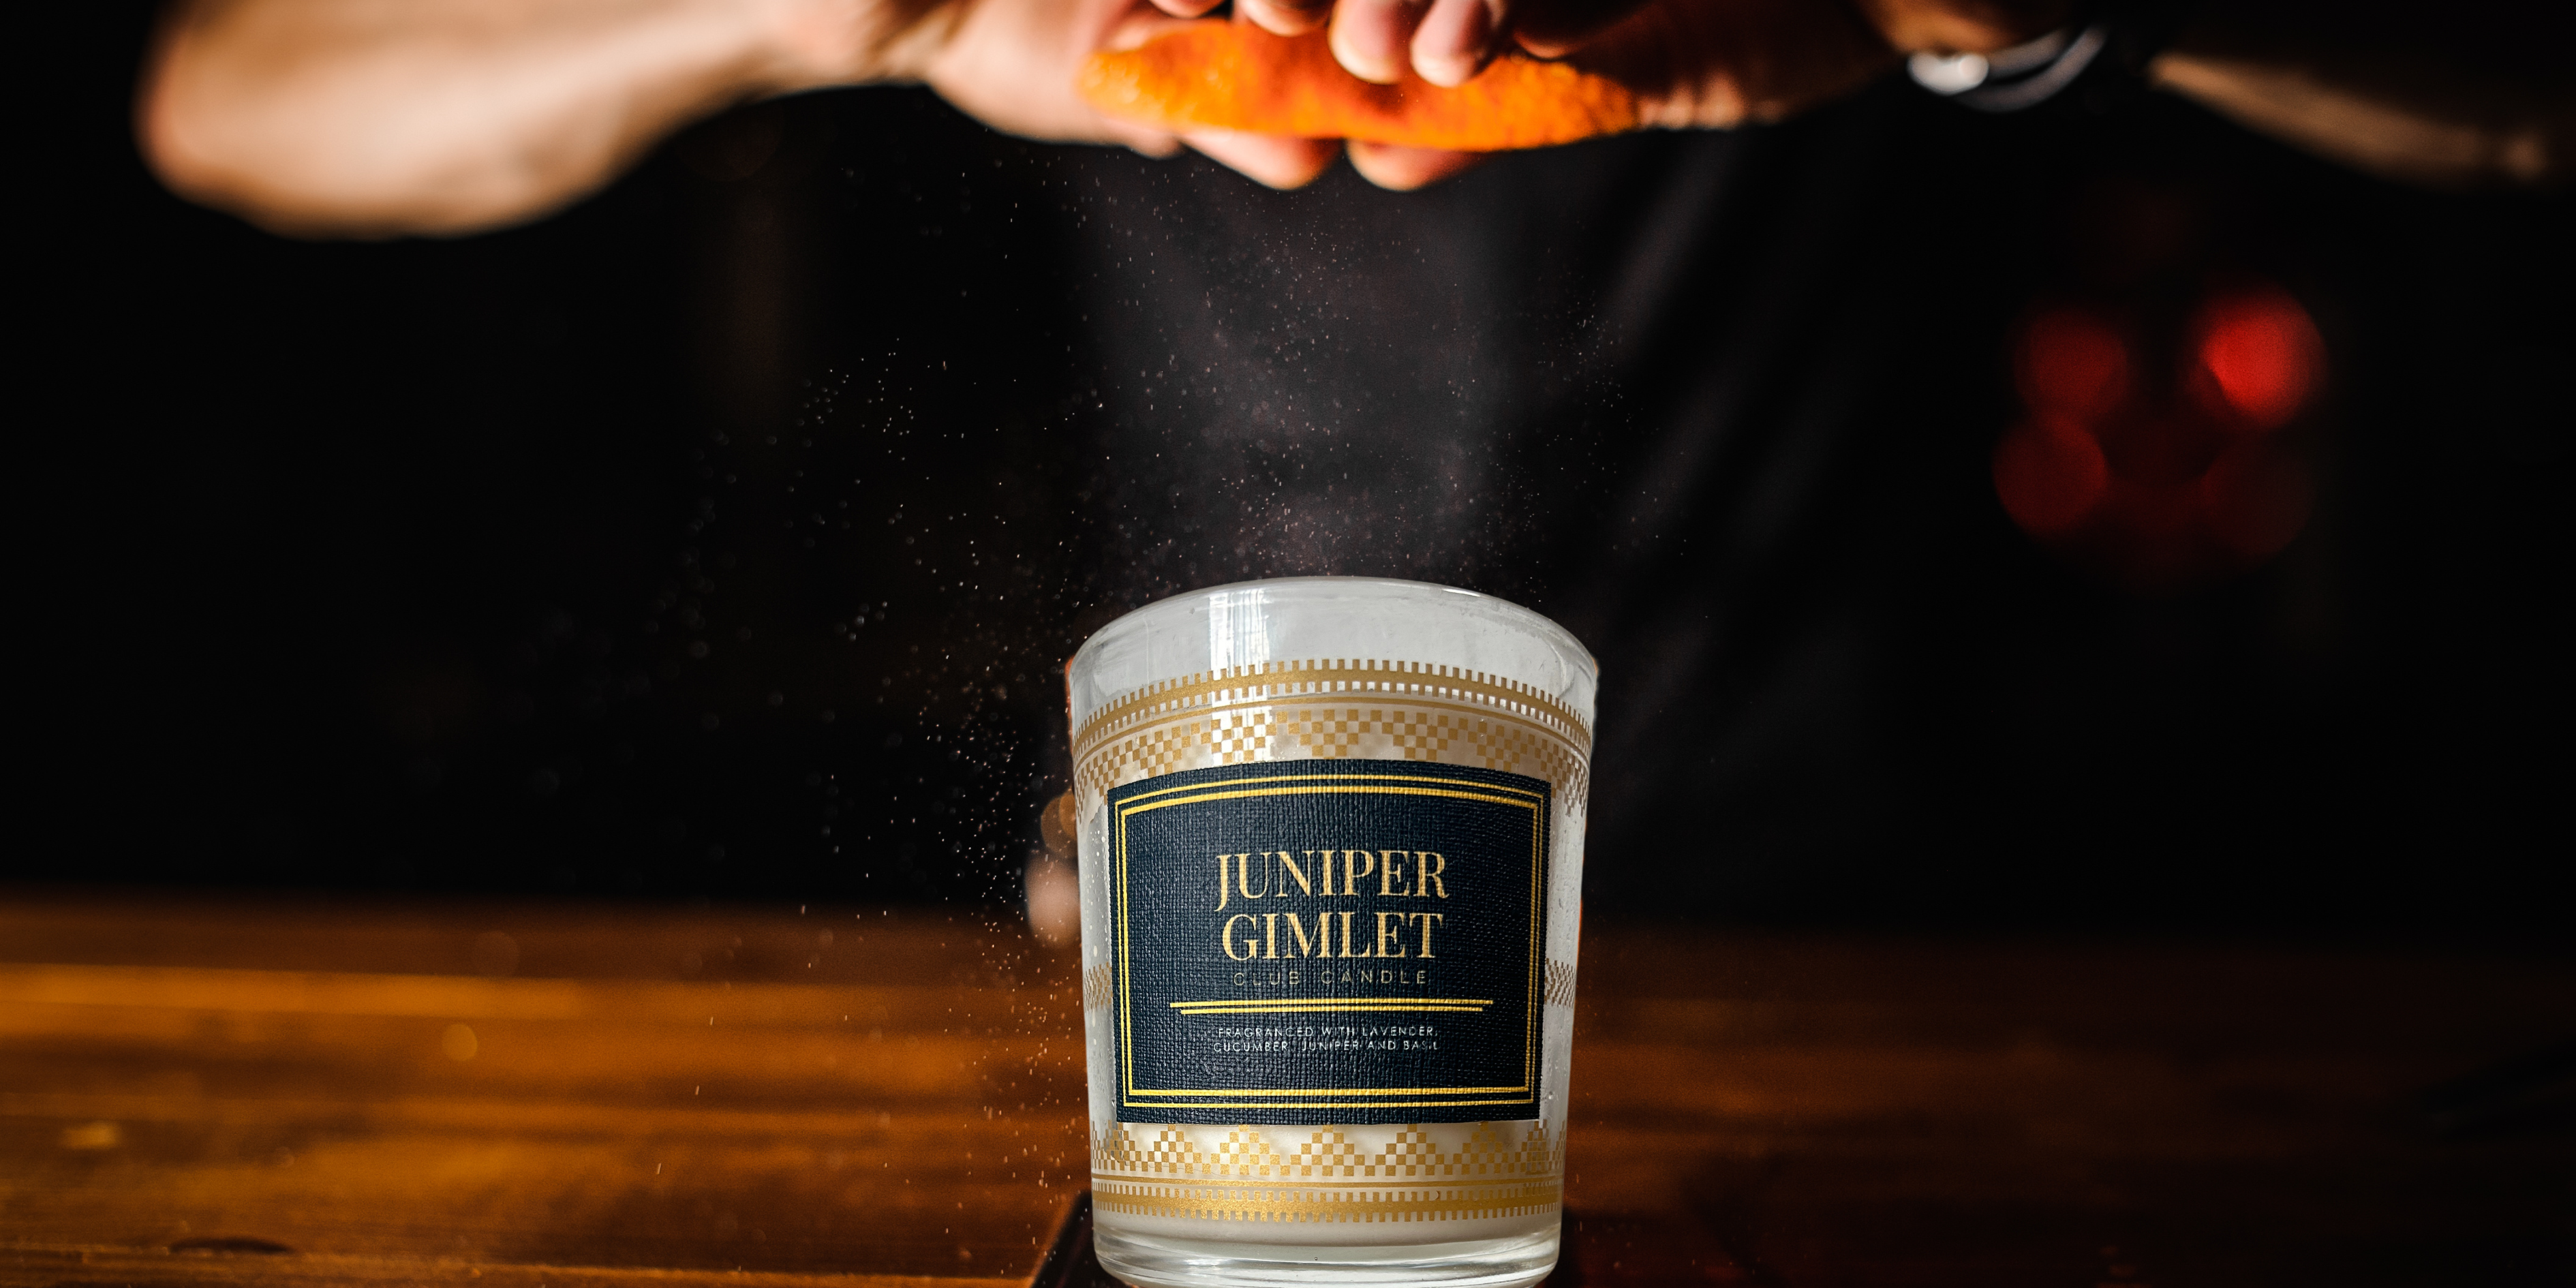 Candles described as cocktails - because our taste and smell are closely linked.